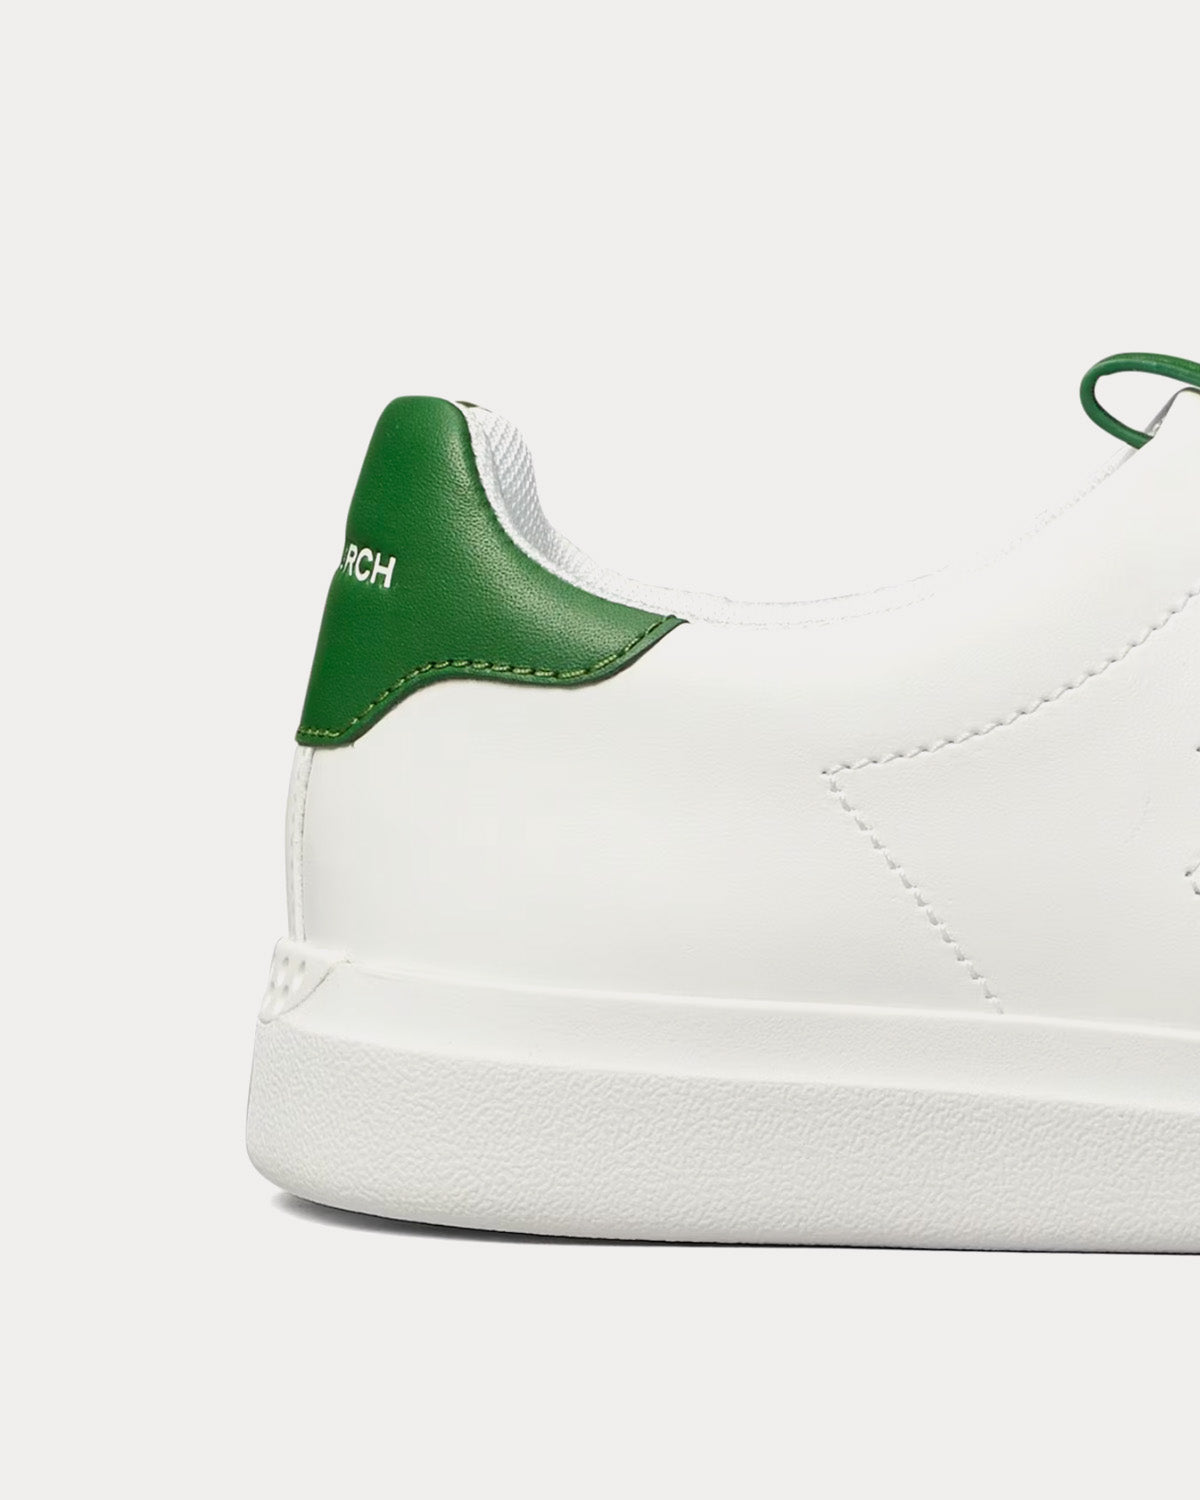 Tory Burch - Double T Howell Court White / Arugula Green Low Top Sneakers